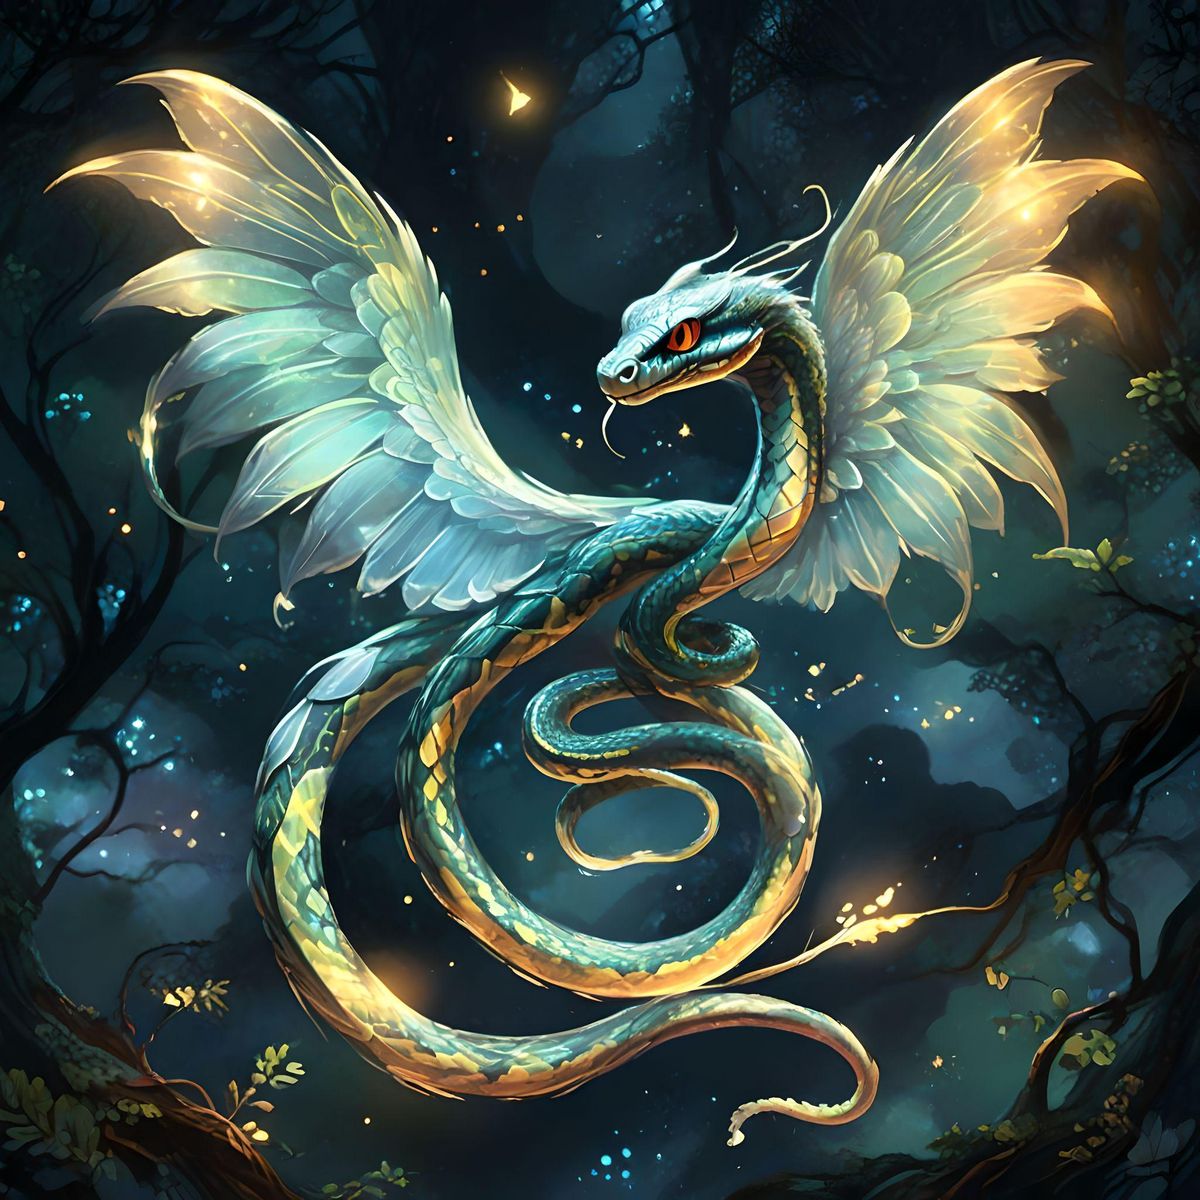 A snake with wings made of gossamer threads, shimmering with iridescent hues. Its scales glistering as moonlight, reflecting the colors of the night sky. It has delicate, translucent ears that catch the faintest of sounds, and its eyes sparkle with the wisdom of ages.